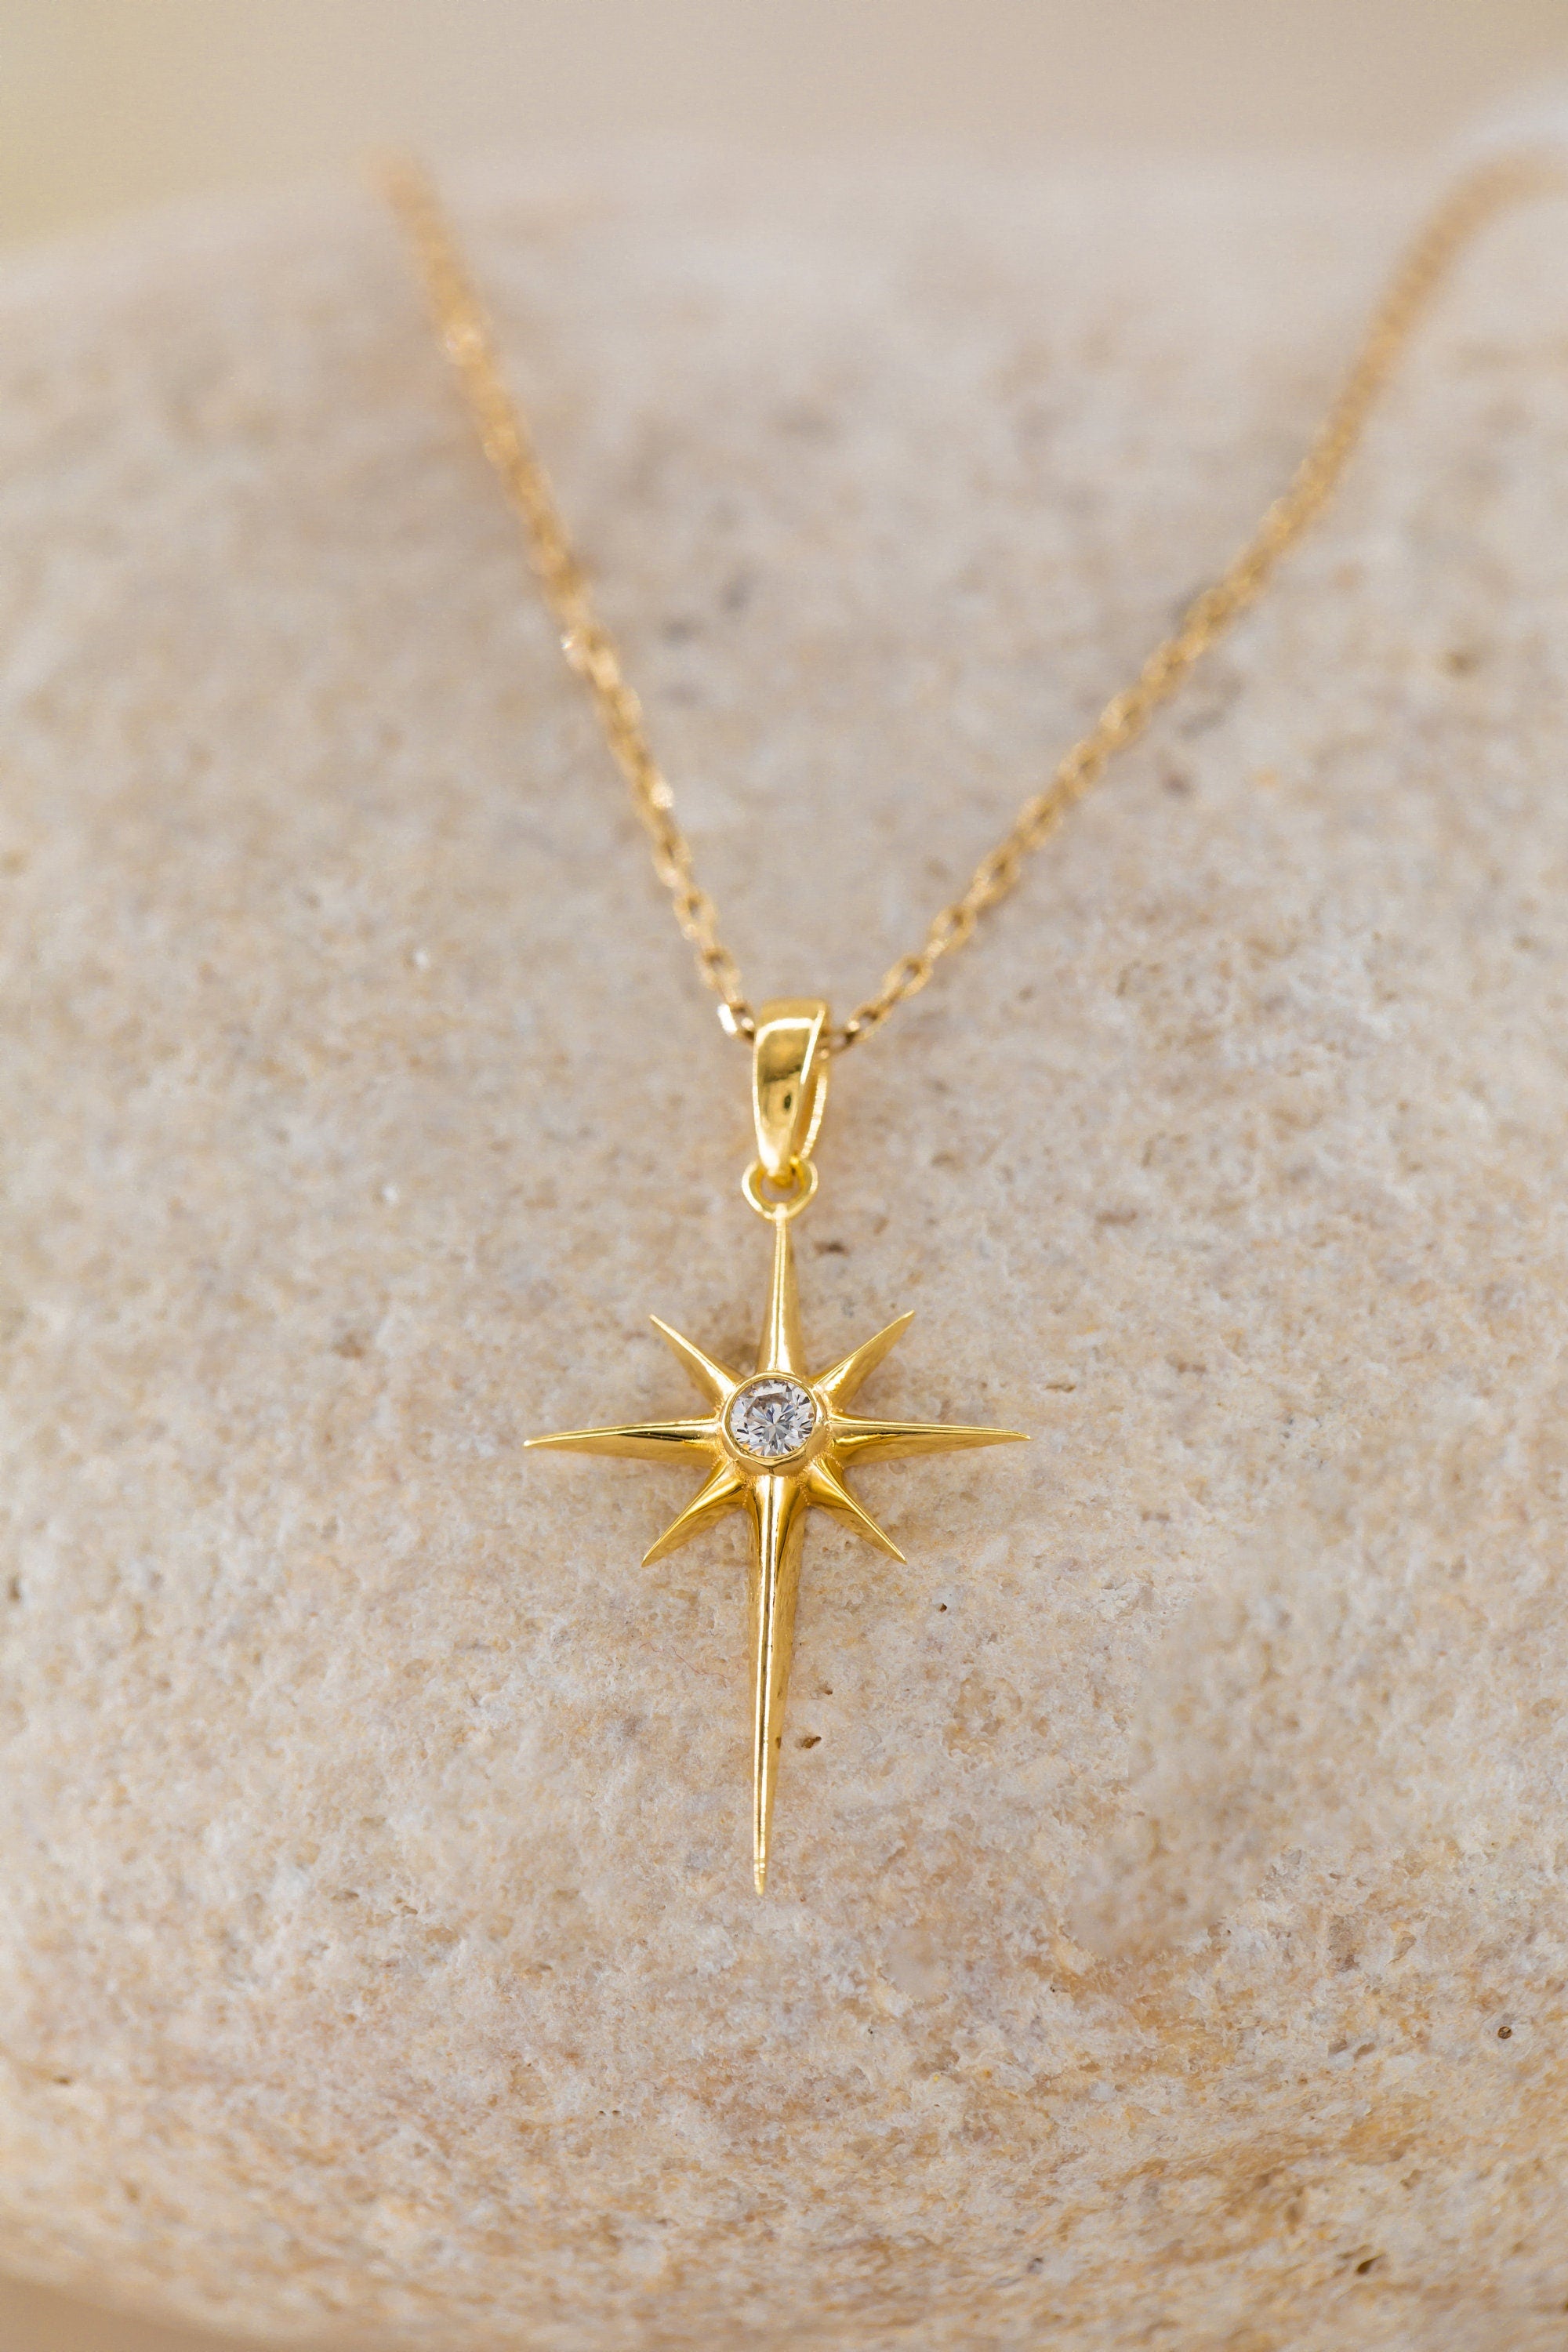 14K North Star Necklace, Gold North Star Pendant, 925 Sterling Silver Star Necklace, Celestial Necklace, Starburst Necklace, Gift Ideas